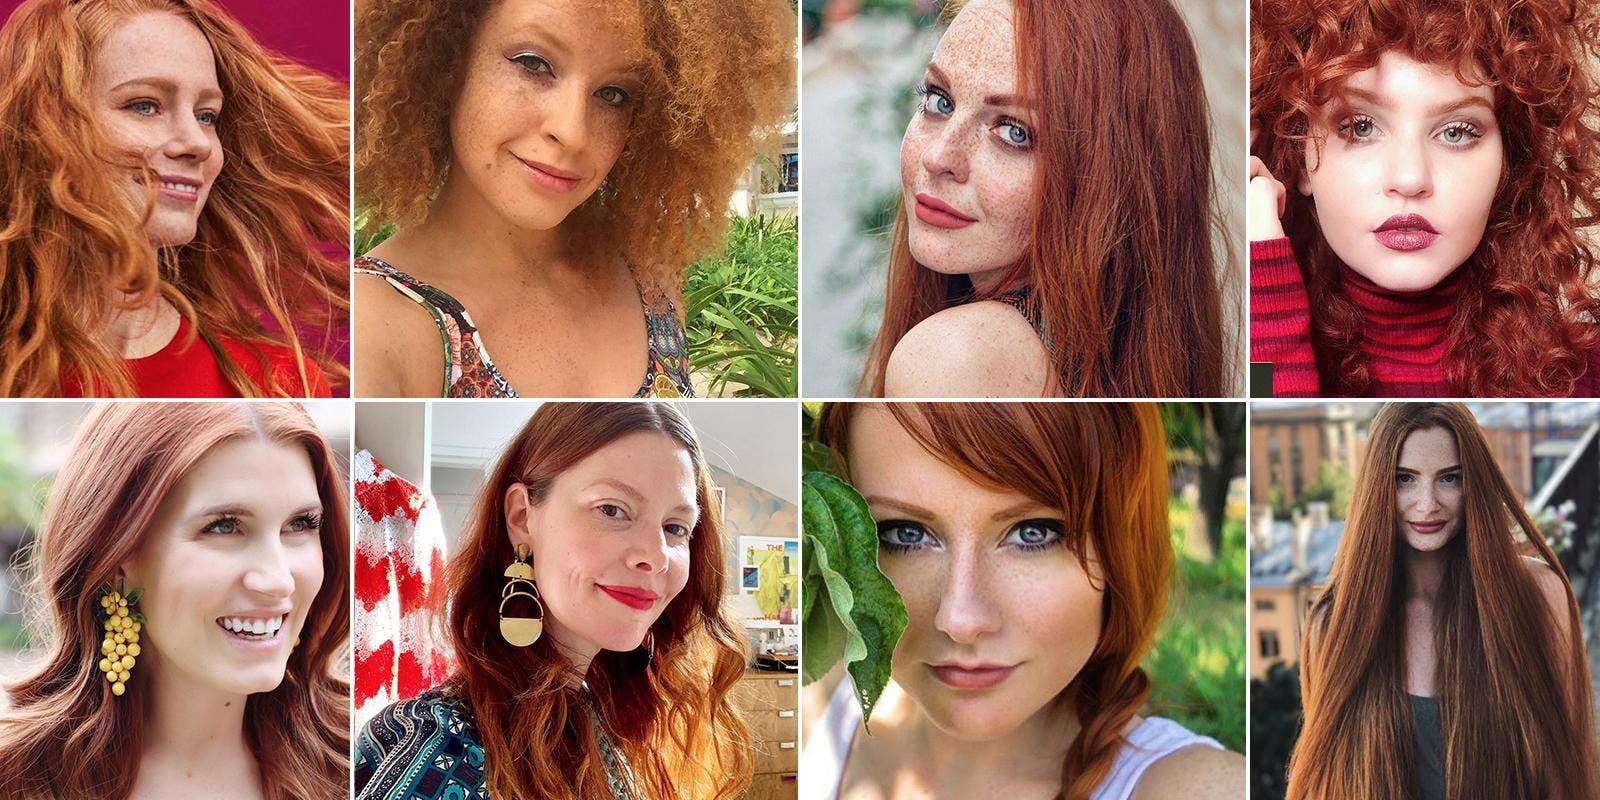 The 8 Instagrammers to Follow for Red Hair Envy